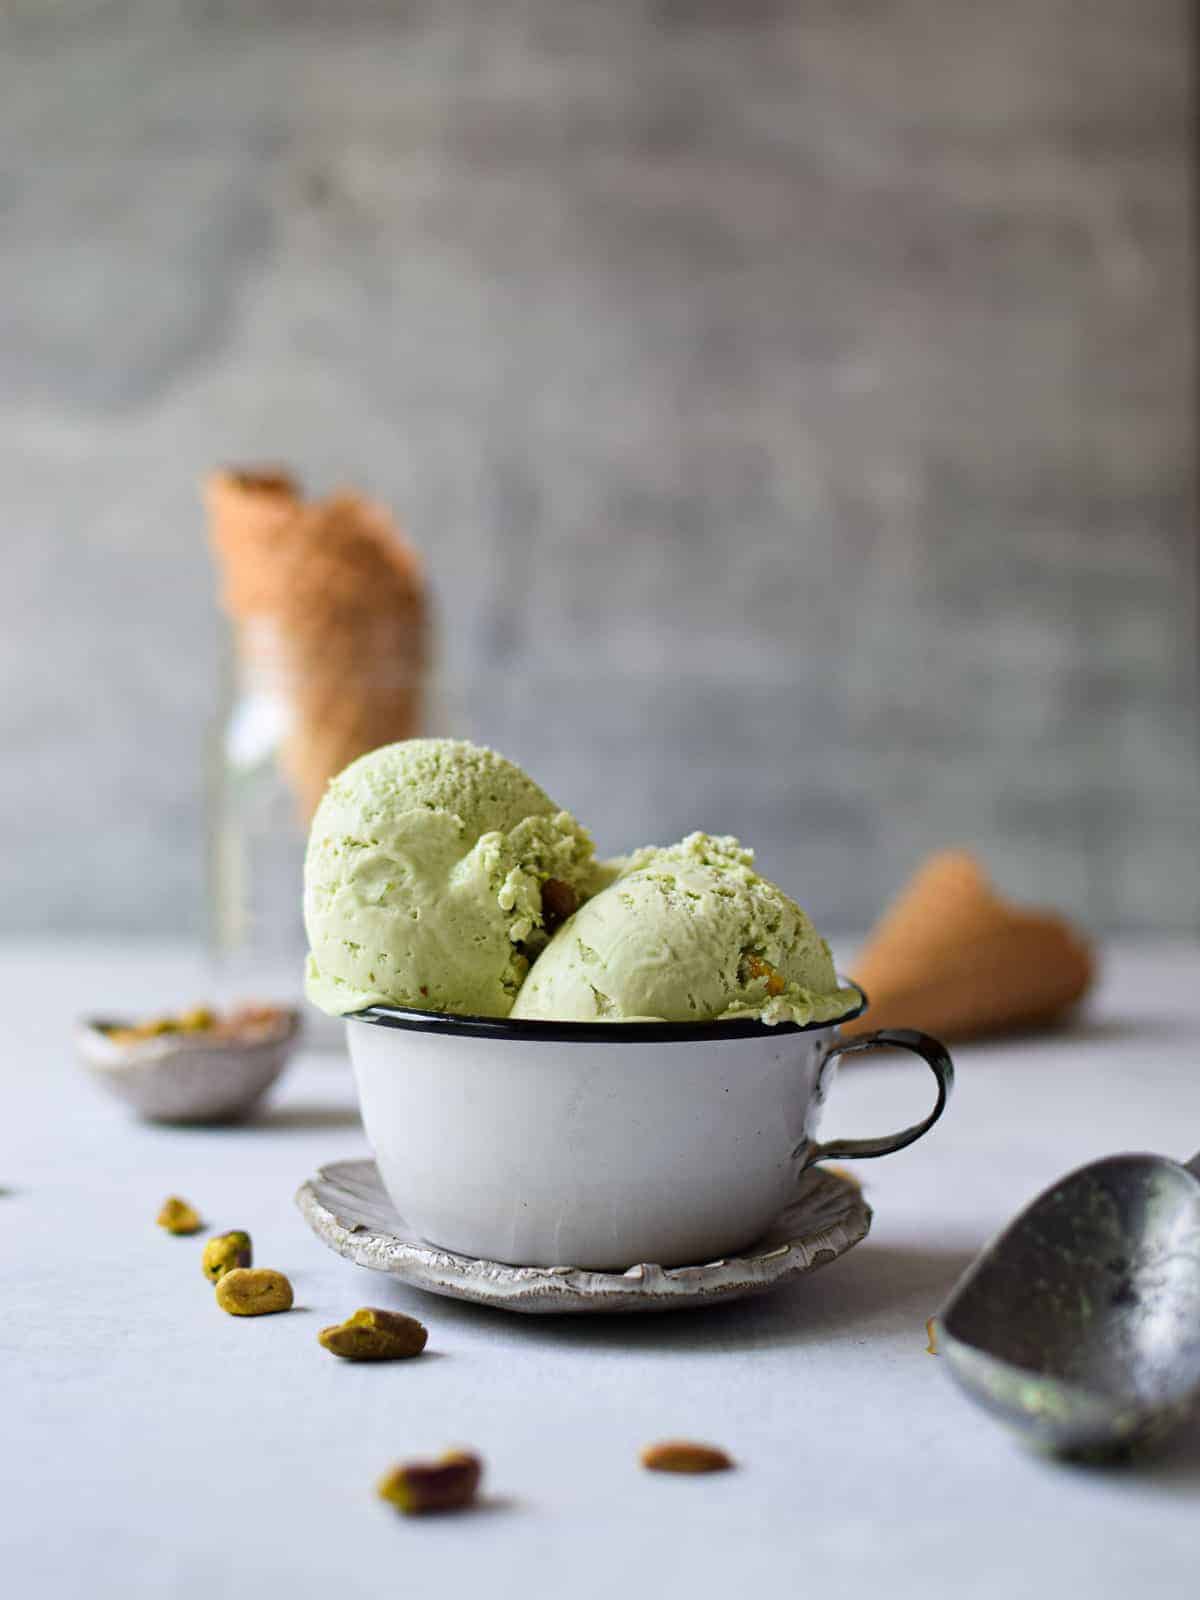 Eye level of 2 scoops of pistachio ice cream in a white cup.